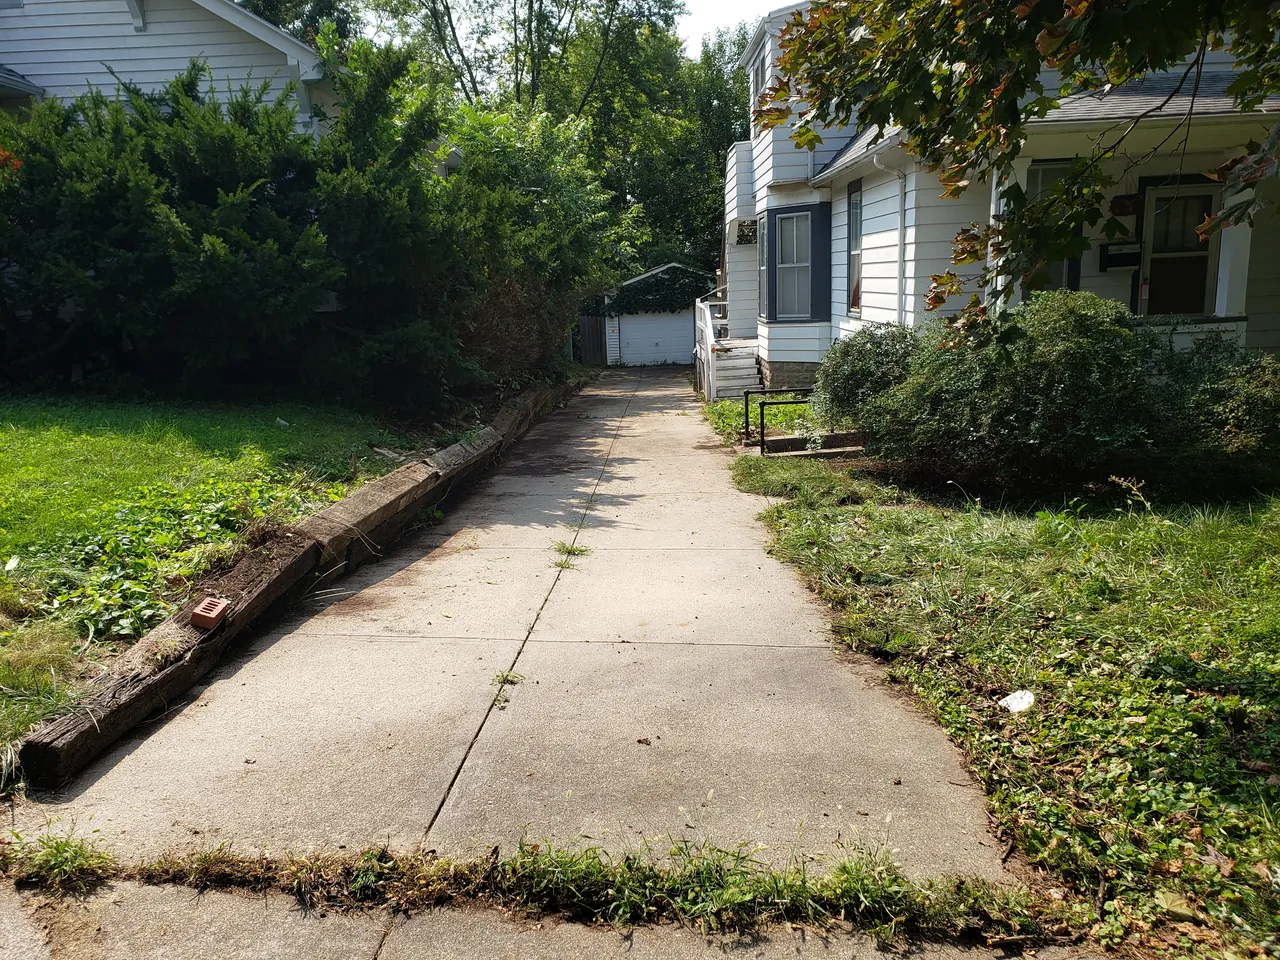 A sidewalk with grass growing on it and bushes around the corner.